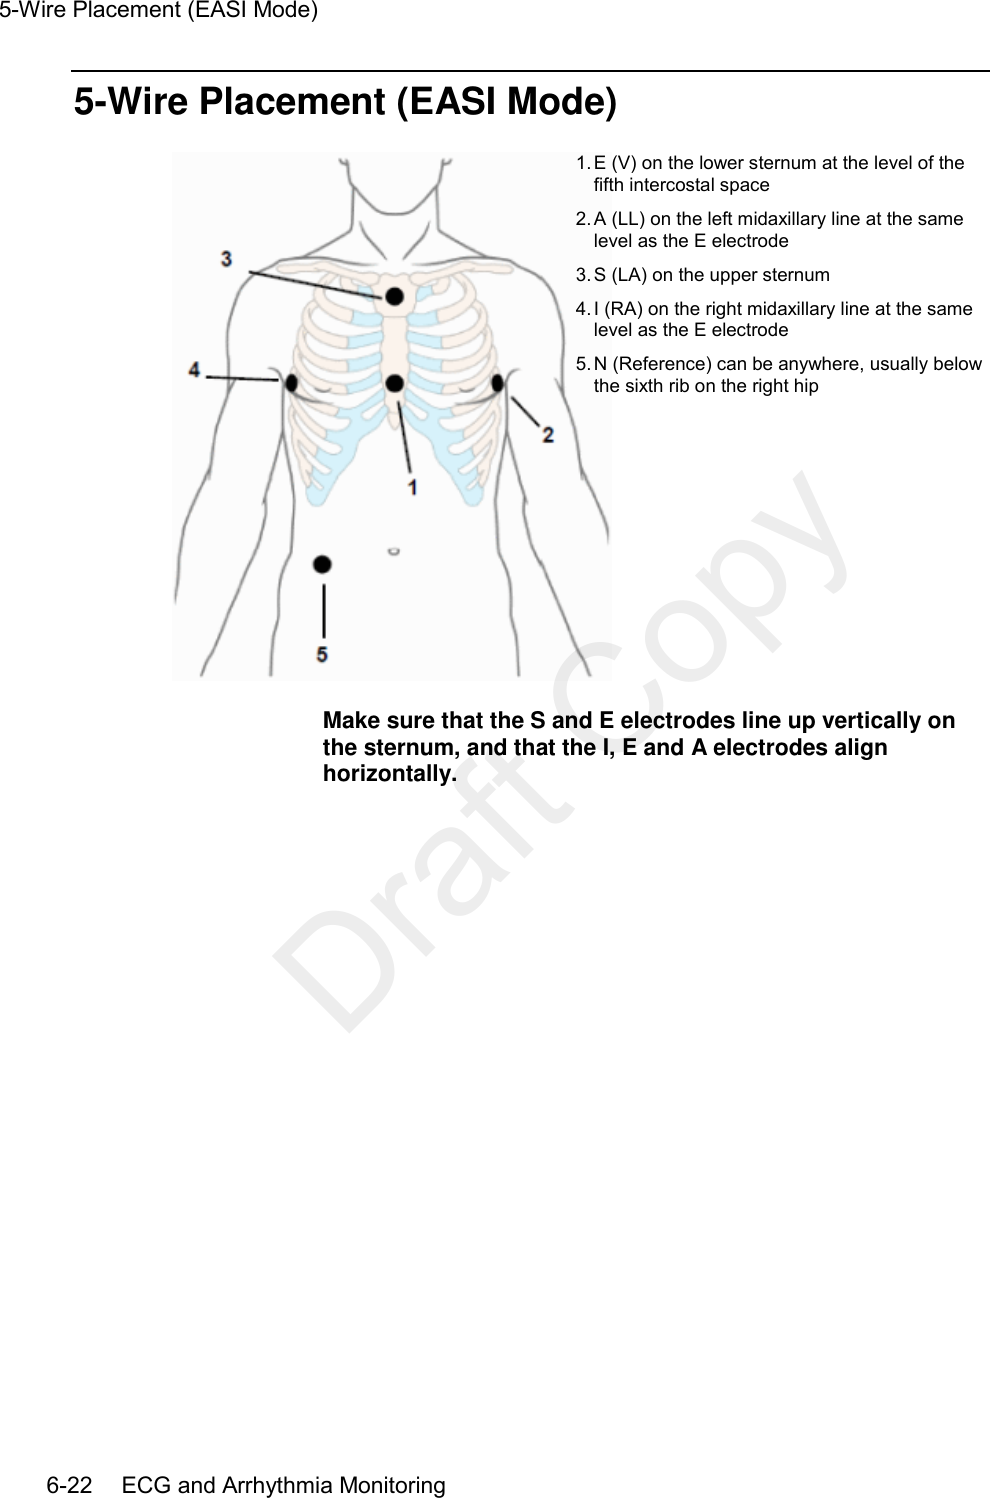 5-Wire Placement (EASI Mode)   6-22    ECG and Arrhythmia Monitoring 5-Wire Placement (EASI Mode)  1. E (V) on the lower sternum at the level of the fifth intercostal space 2. A (LL) on the left midaxillary line at the same level as the E electrode 3. S (LA) on the upper sternum 4. I (RA) on the right midaxillary line at the same level as the E electrode 5. N (Reference) can be anywhere, usually below the sixth rib on the right hip Make sure that the S and E electrodes line up vertically on the sternum, and that the I, E and A electrodes align horizontally.   Draft Copy